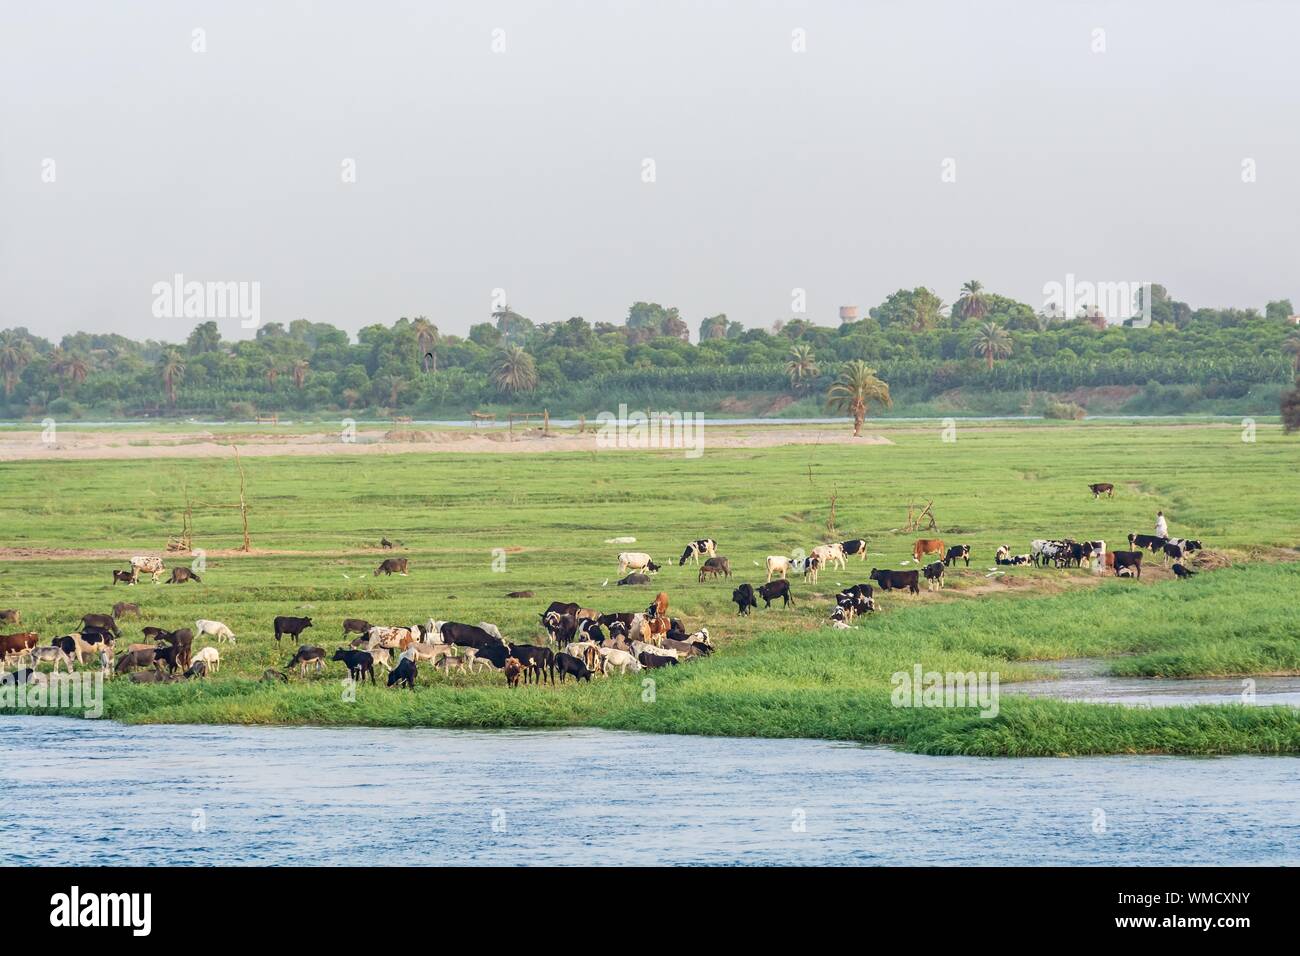 Cattle or livestock grazing on the bank of Nile river, Egypt Stock Photo